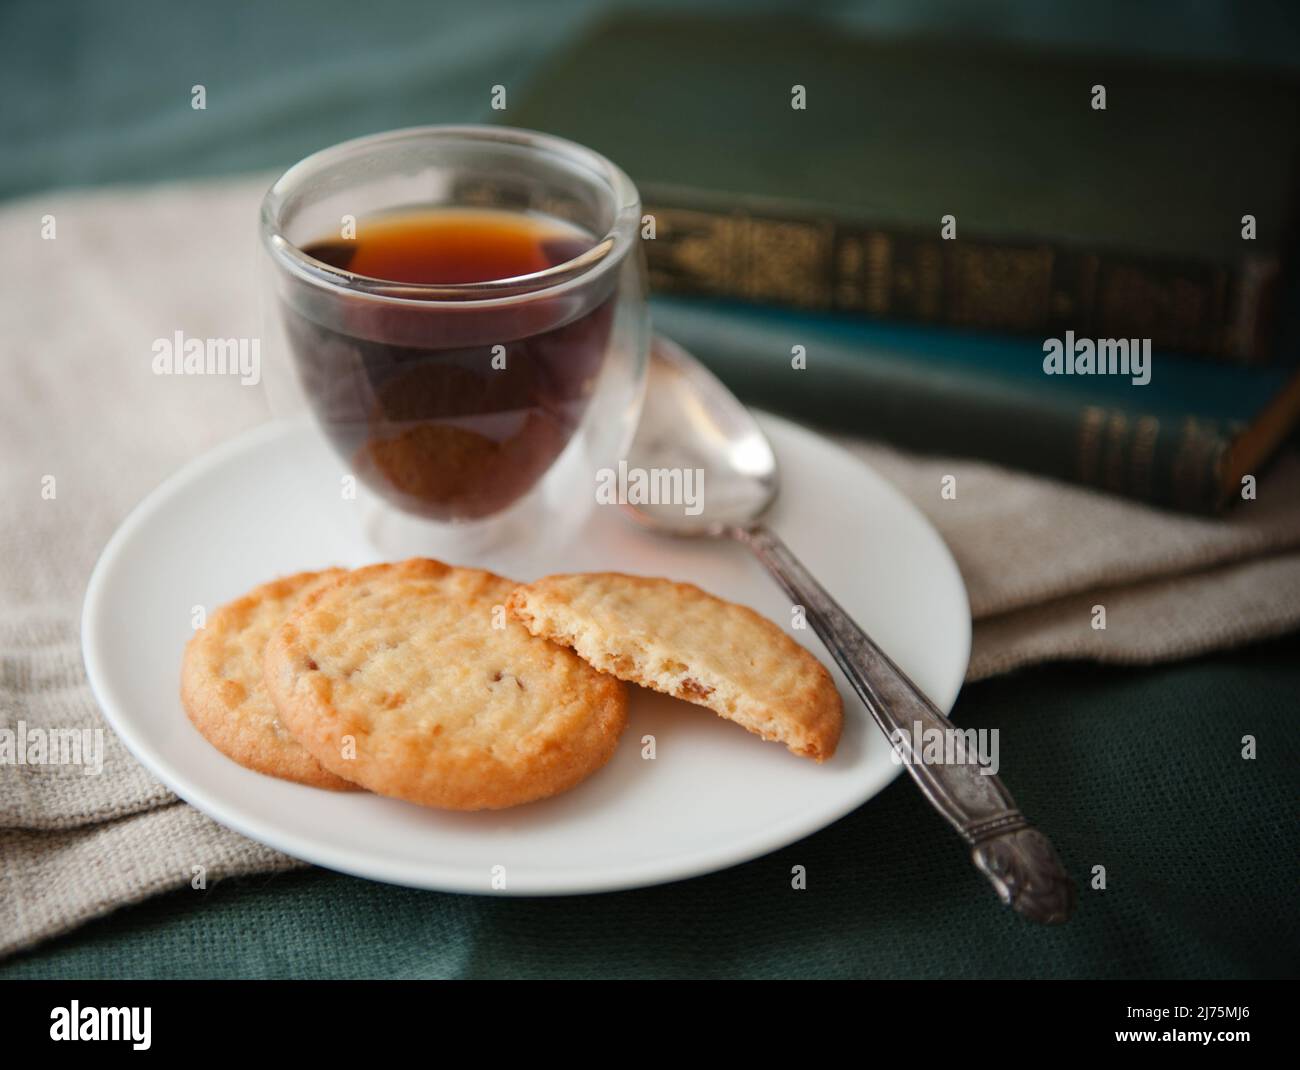 Espresso in a glass with biscuits Stock Photo